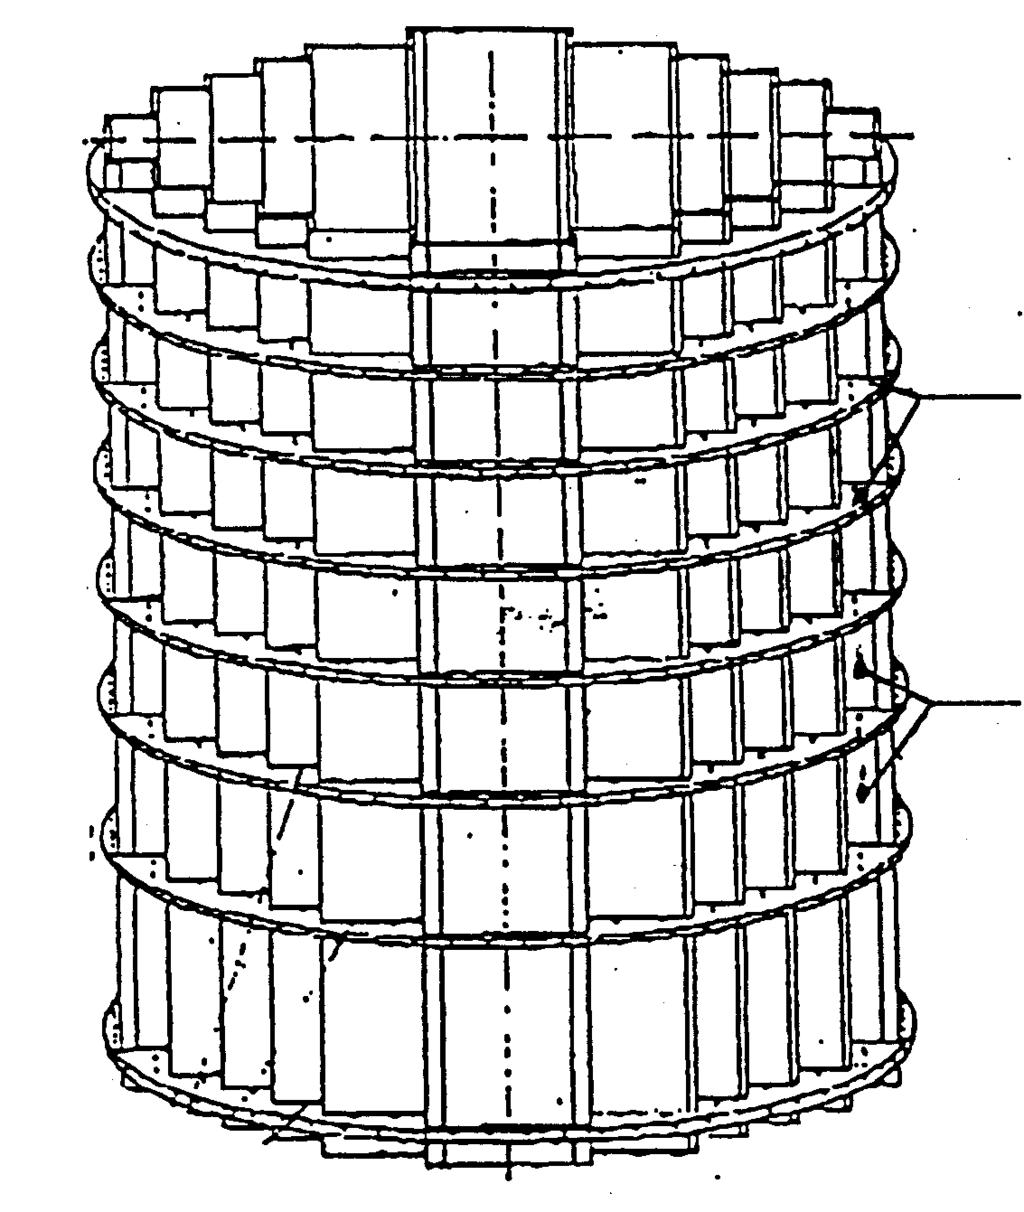 Baffle-former-barrel Assembly in a Typical Westinghouse